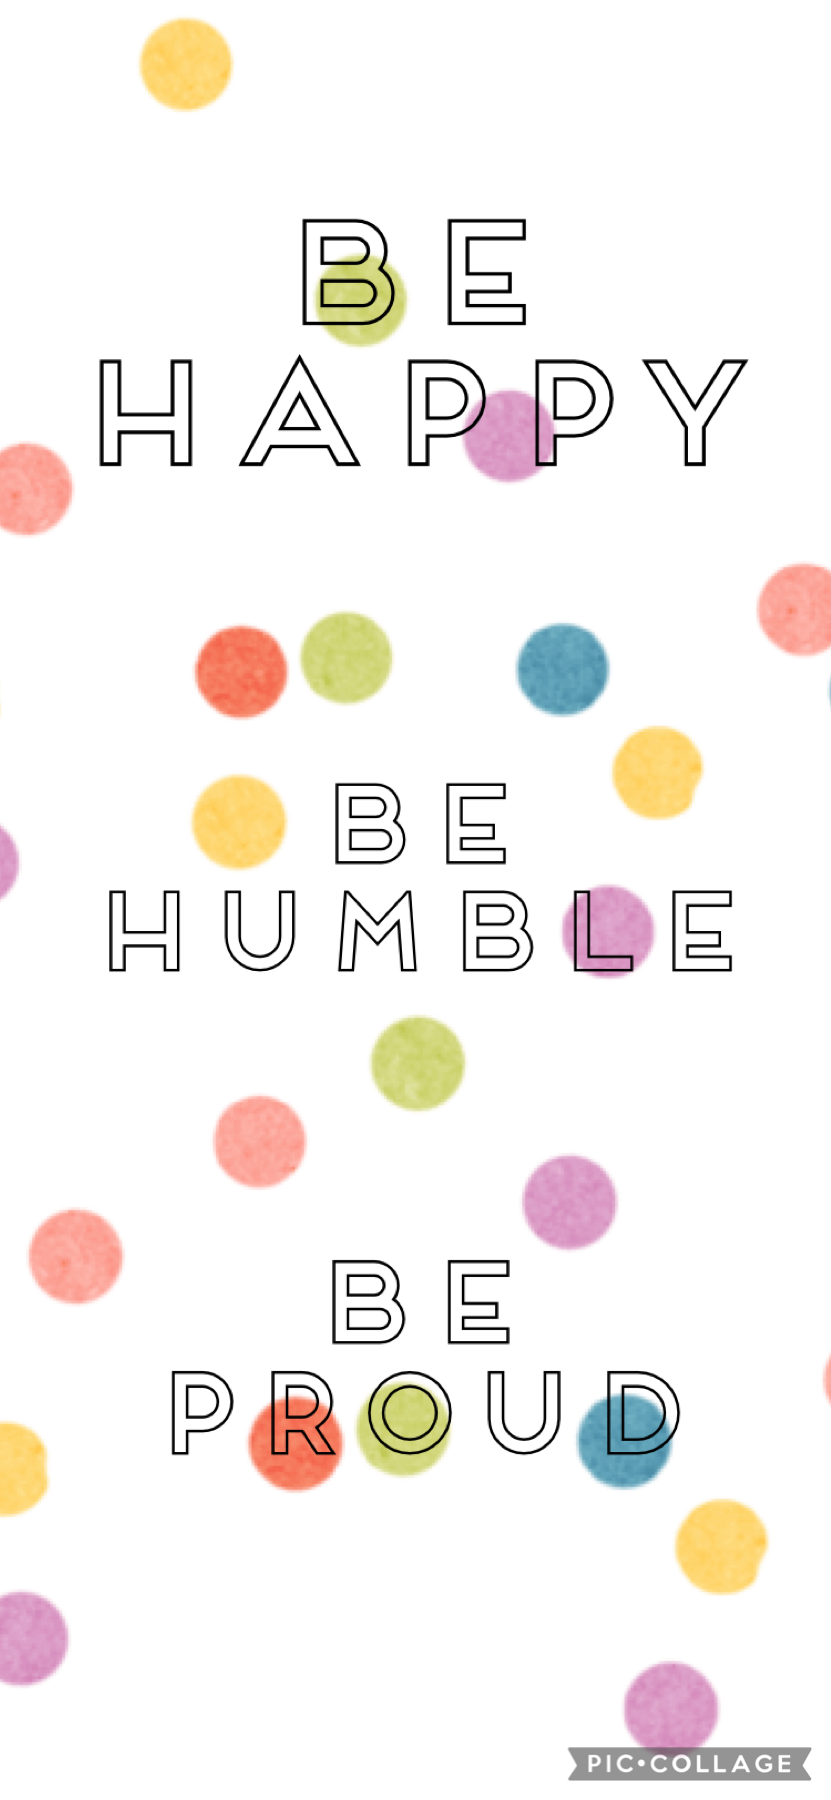 Be Happy, Humble, and proud of who you are!


Credits: PicCollage